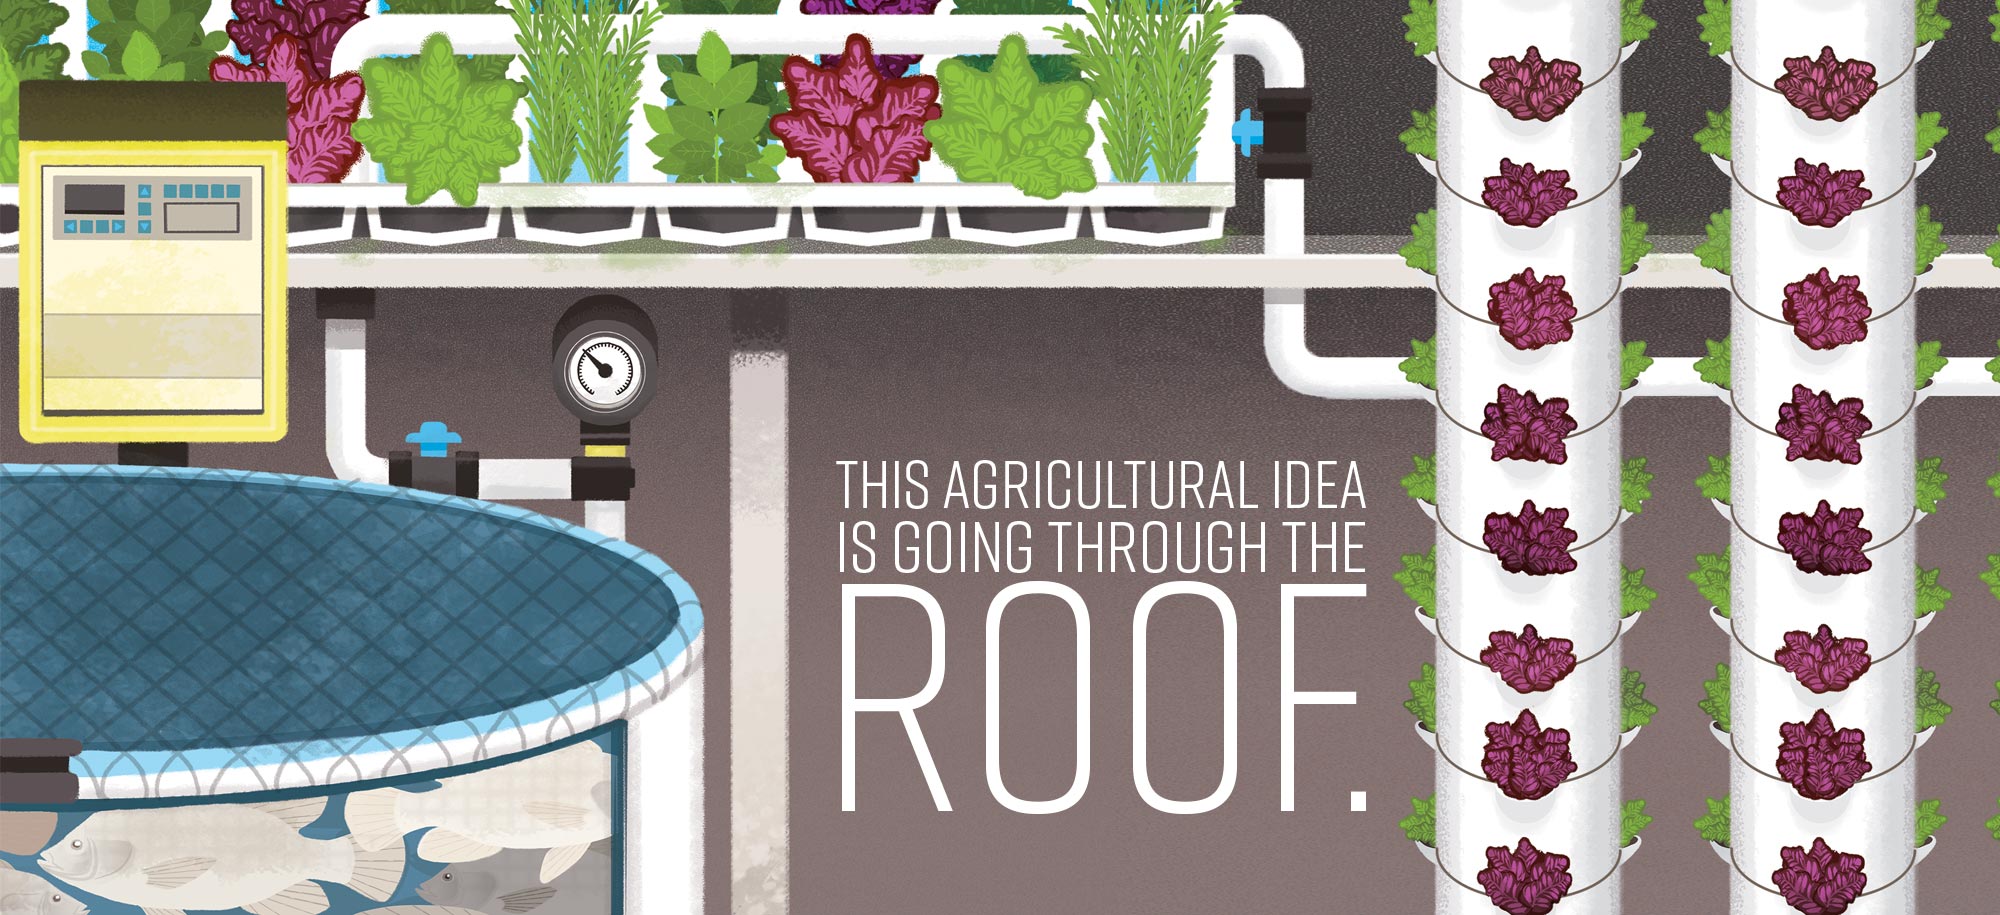 This Agricultural Idea is Going Through the Roof